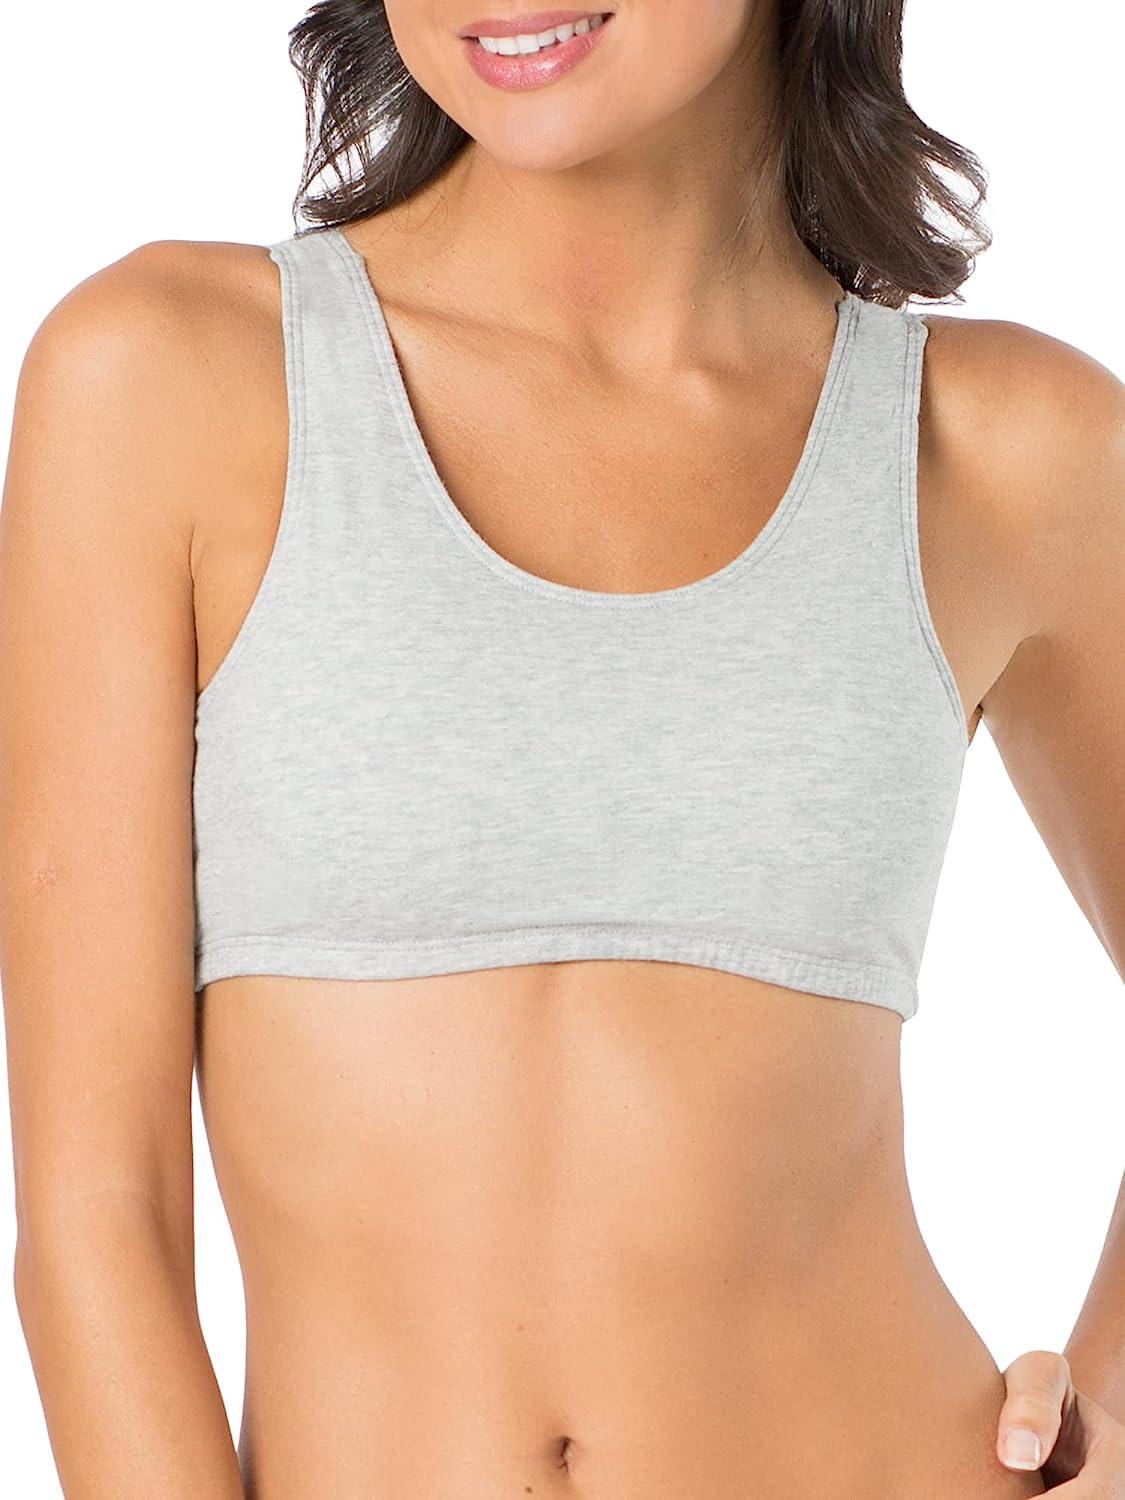  Fruit Of The Loom Womens Front Close Builtup Sports Bra